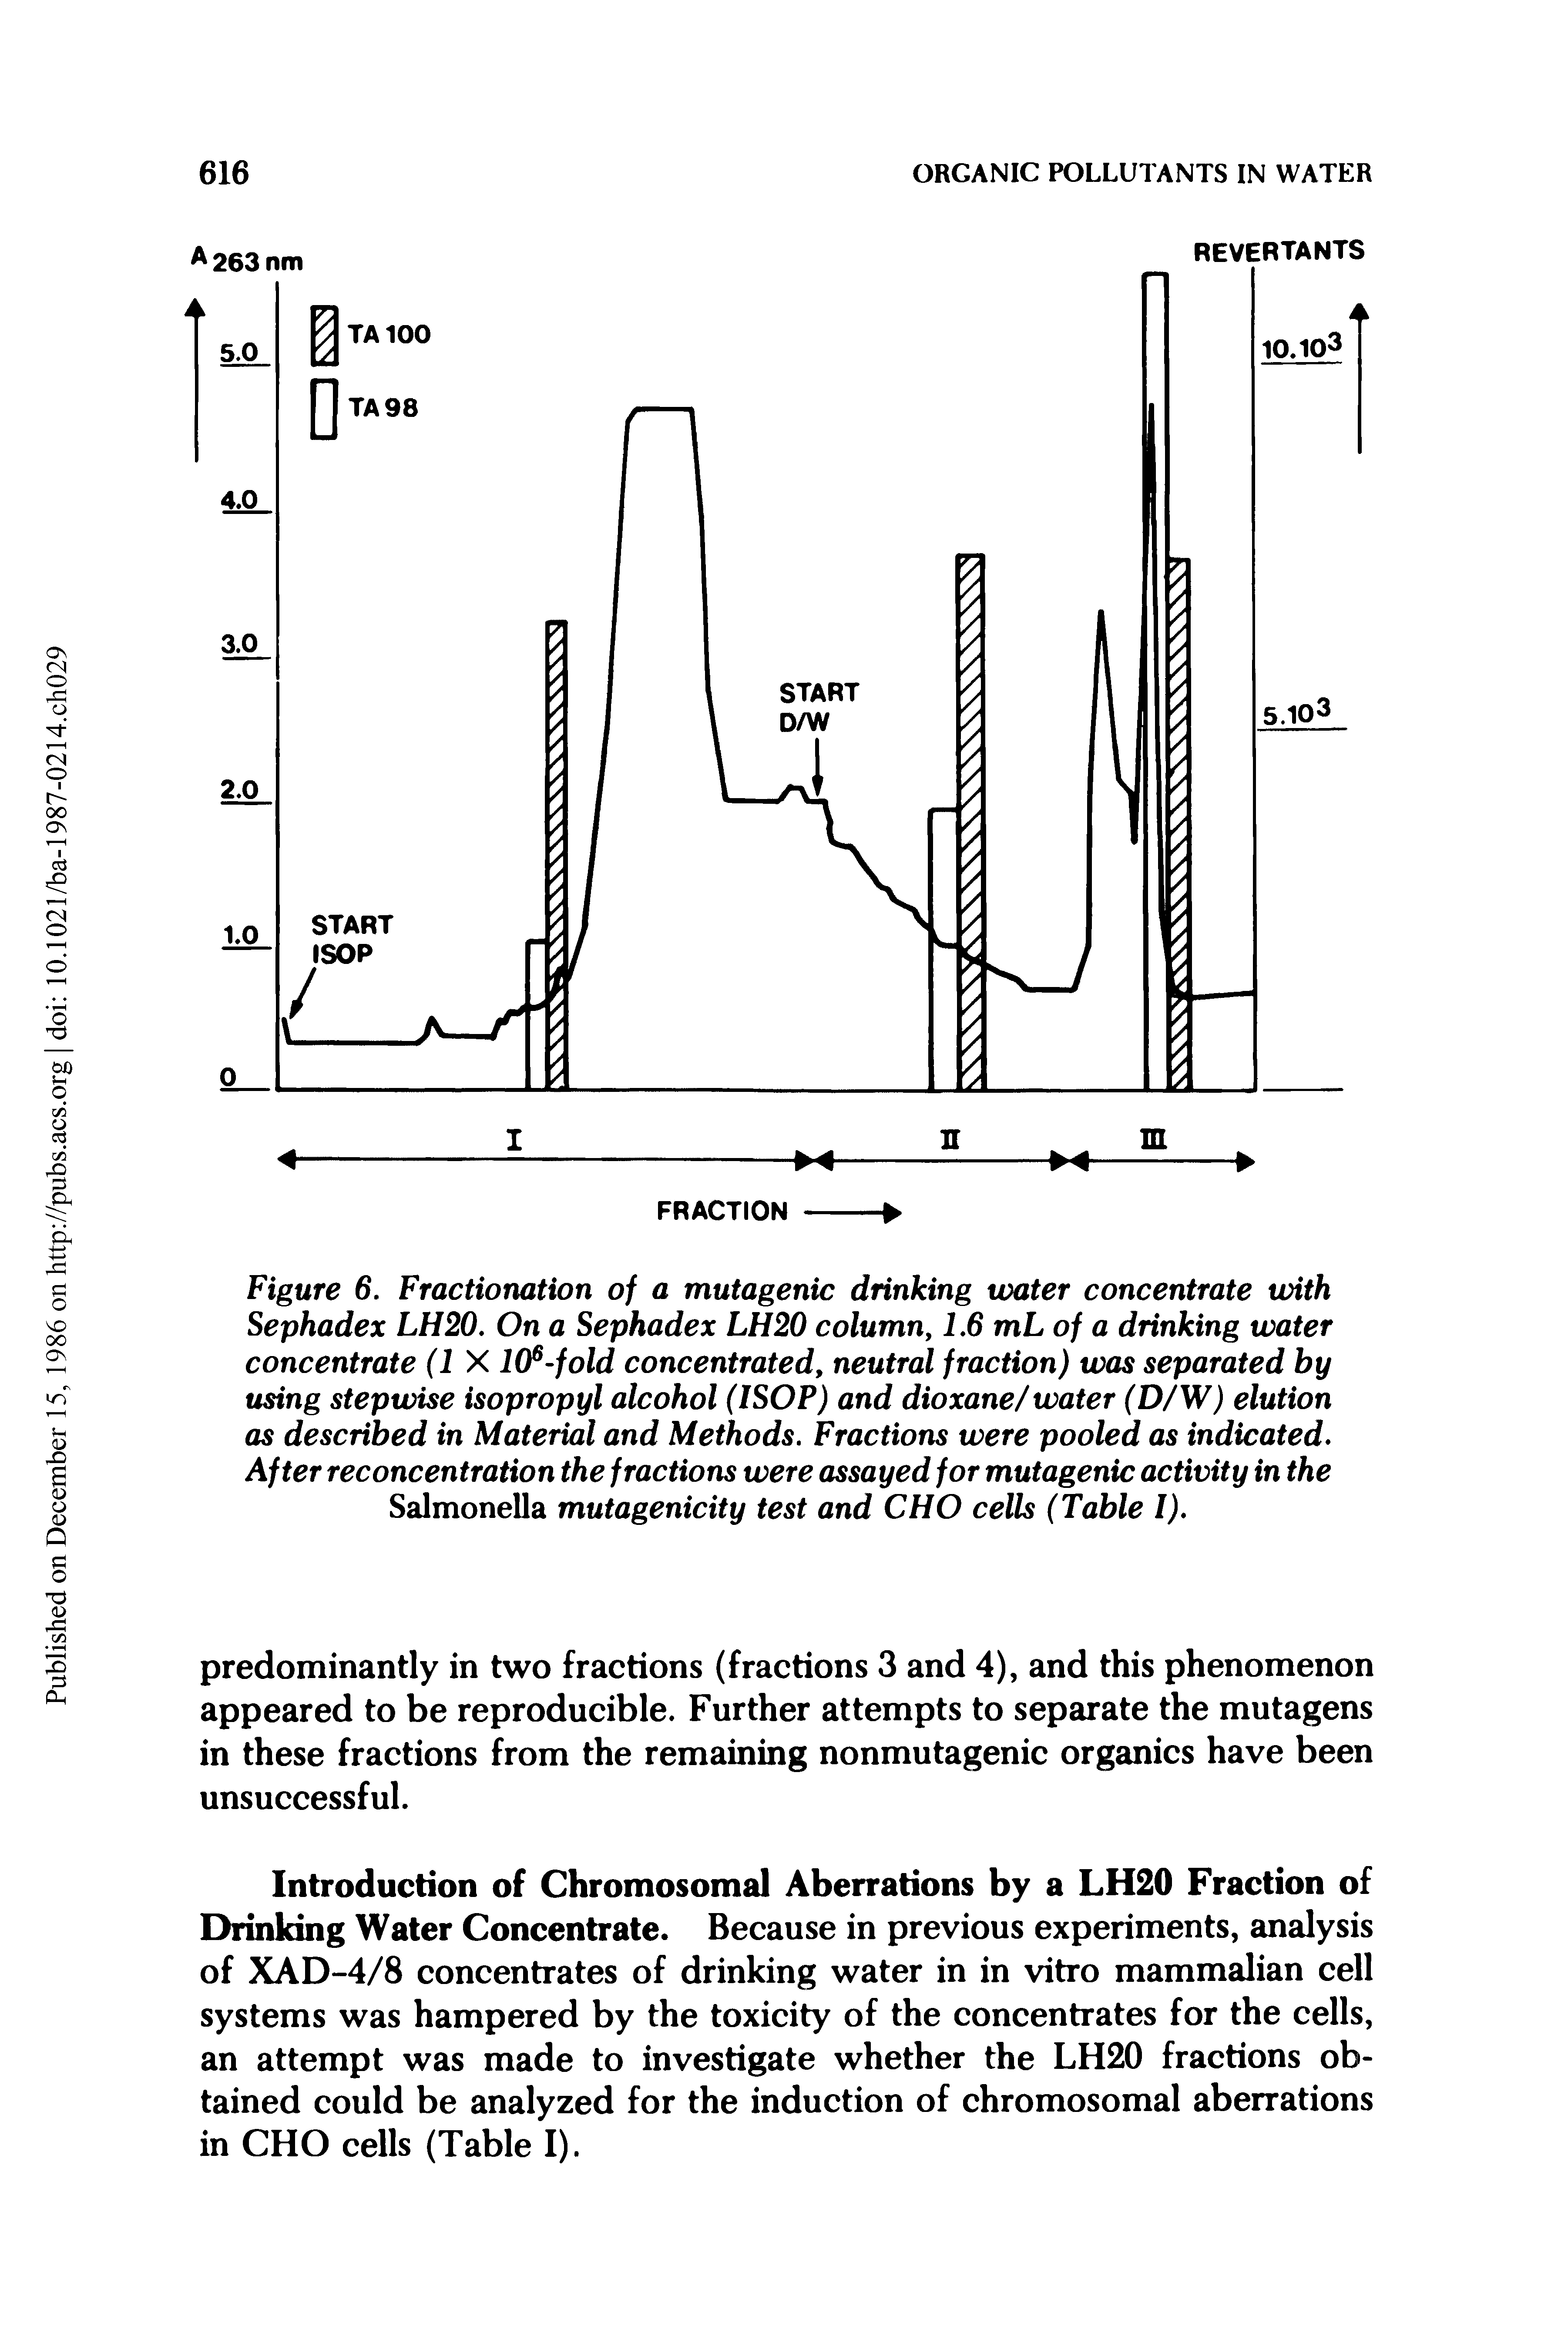 Figure 6. Fractionation of a mutagenic drinking water concentrate with Sephadex LH20. On a Sephadex LH20 column, 1.6 mL of a drinking water concentrate (IX 106-fold concentrated, neutral fraction) was separated by using stepwise isopropyl alcohol (ISOP) and dioxane/water (D/W) elution as described in Material and Methods. Fractions were pooled as indicated. After reconcentration the fractions were assayed for mutagenic activity in the Salmonella mutagenicity test and CHO cells (Table I).